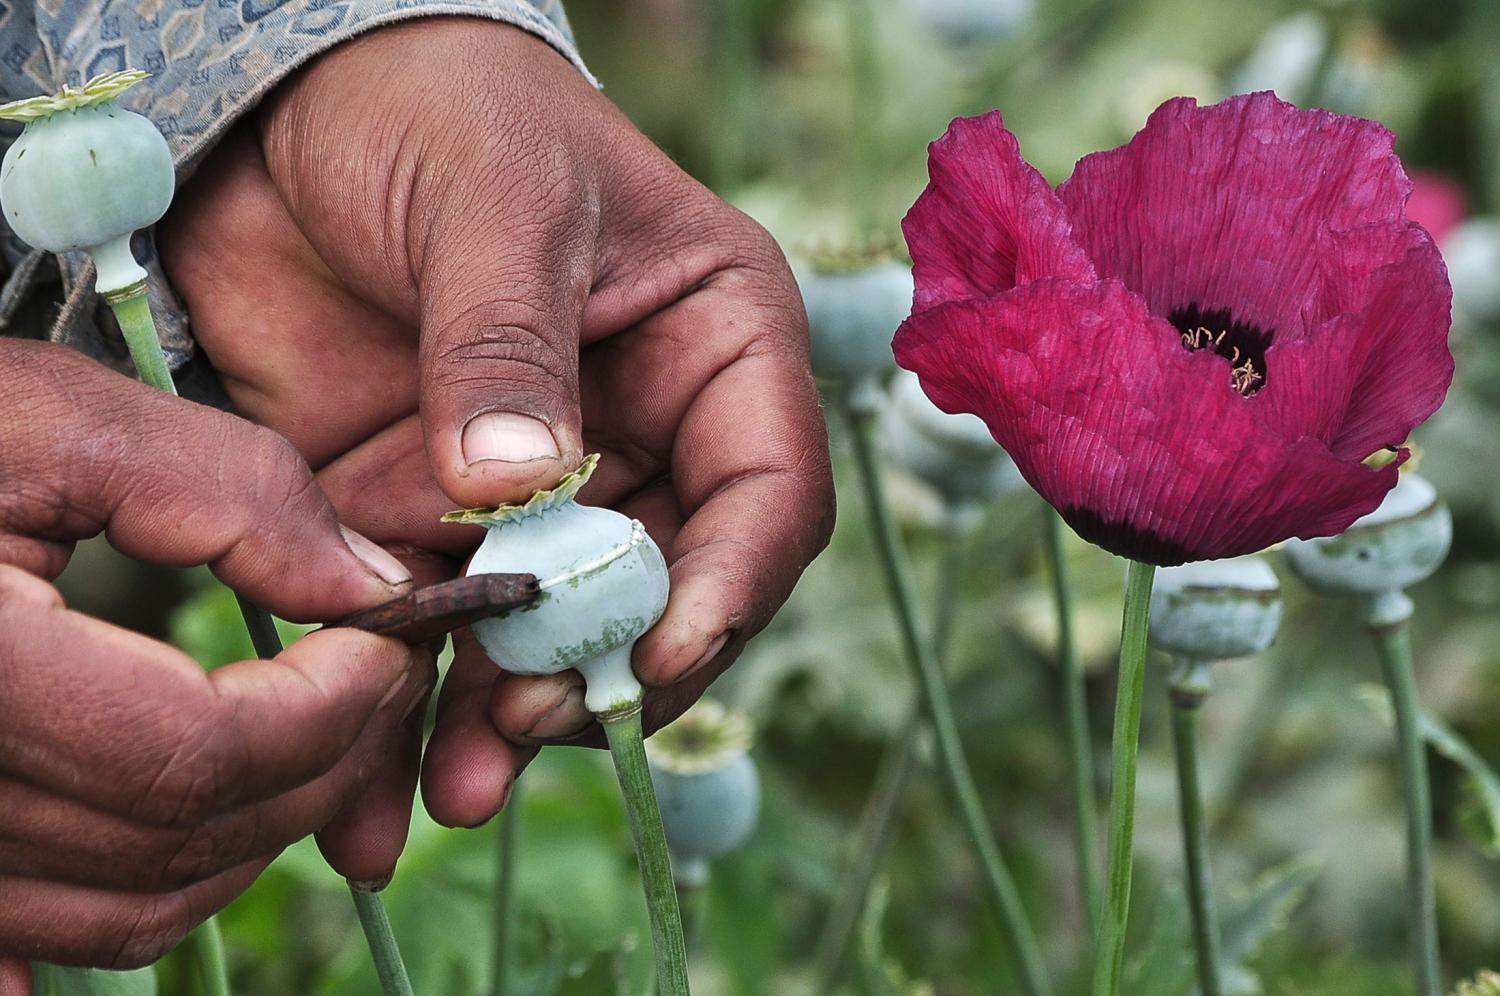 A man lances a poppy bulb to extract the sap, which will be used to make opium, at a field in the municipality of Heliodoro Castillo, in the mountain region of the state of Guerrero January 3, 2015. According to local media, 42% of the poppies produced in Mexico come from the state of Guerrero, where impoverished farmers in the mountain cultivate opium poppies as cash crop due to the extreme poverty in where they live. Picture taken January 3, 2015. REUTERS/Claudio Vargas (MEXICO - Tags: DRUGS SOCIETY POVERTY AGRICULTURE) - GM1EB2A0RFL01